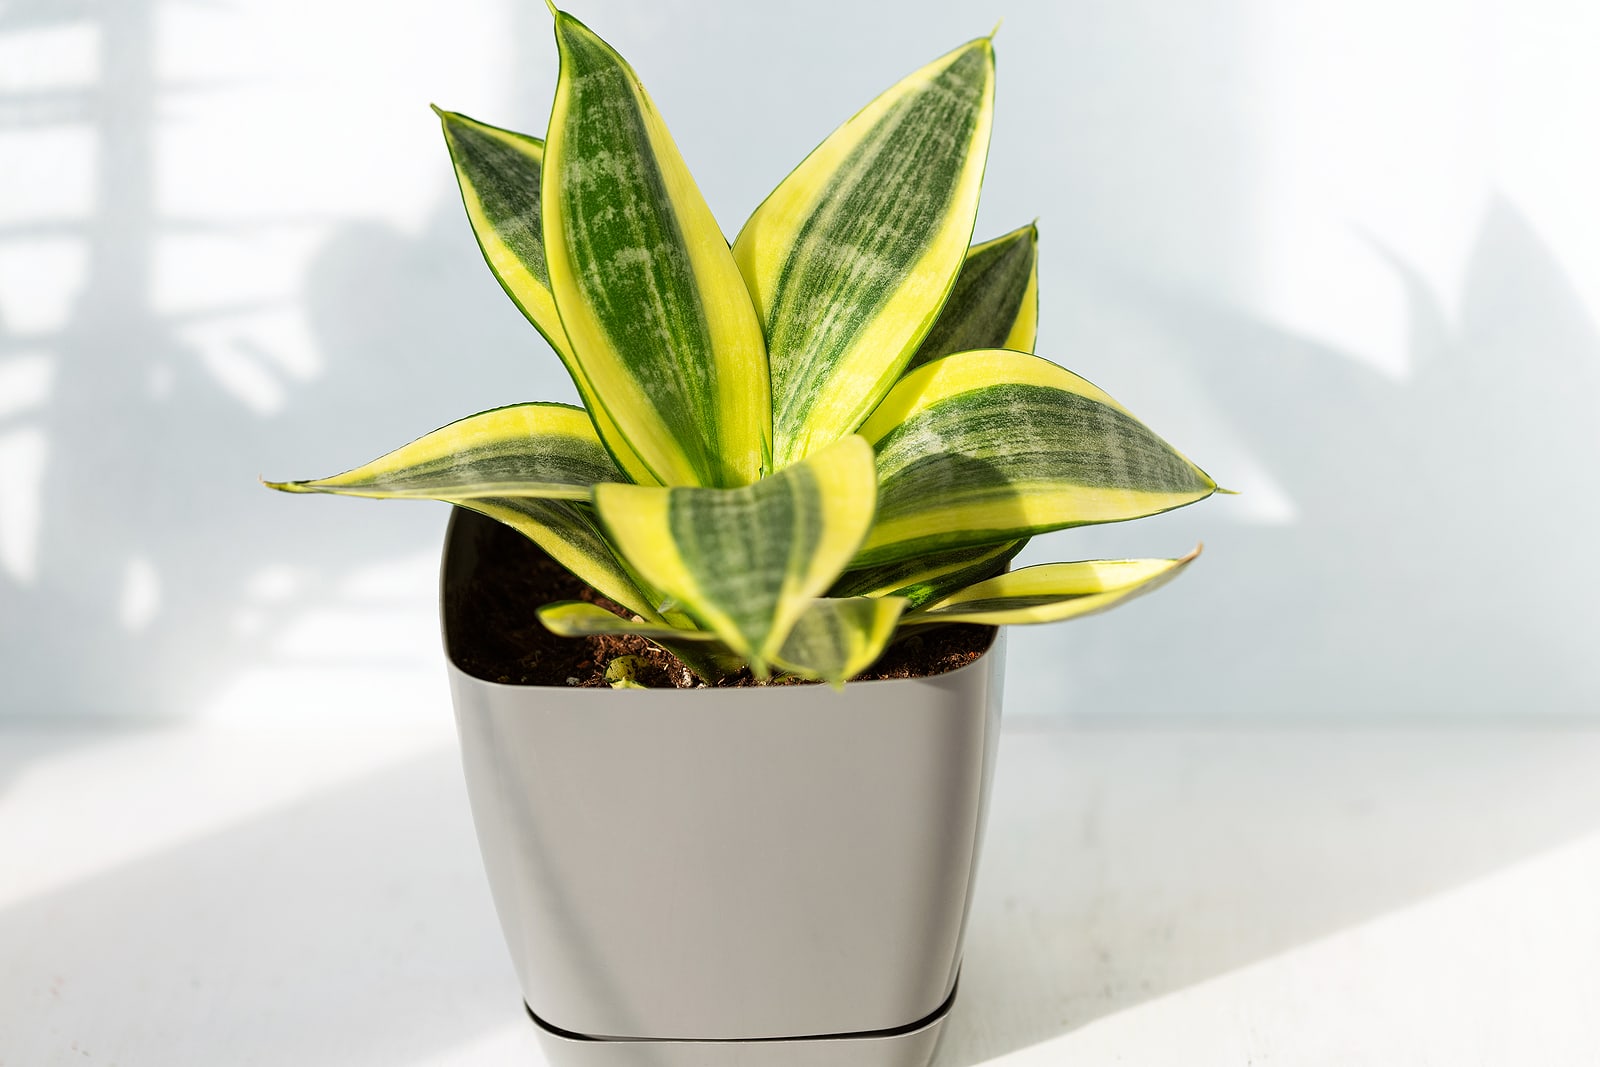 Snake plant indoors in a pot